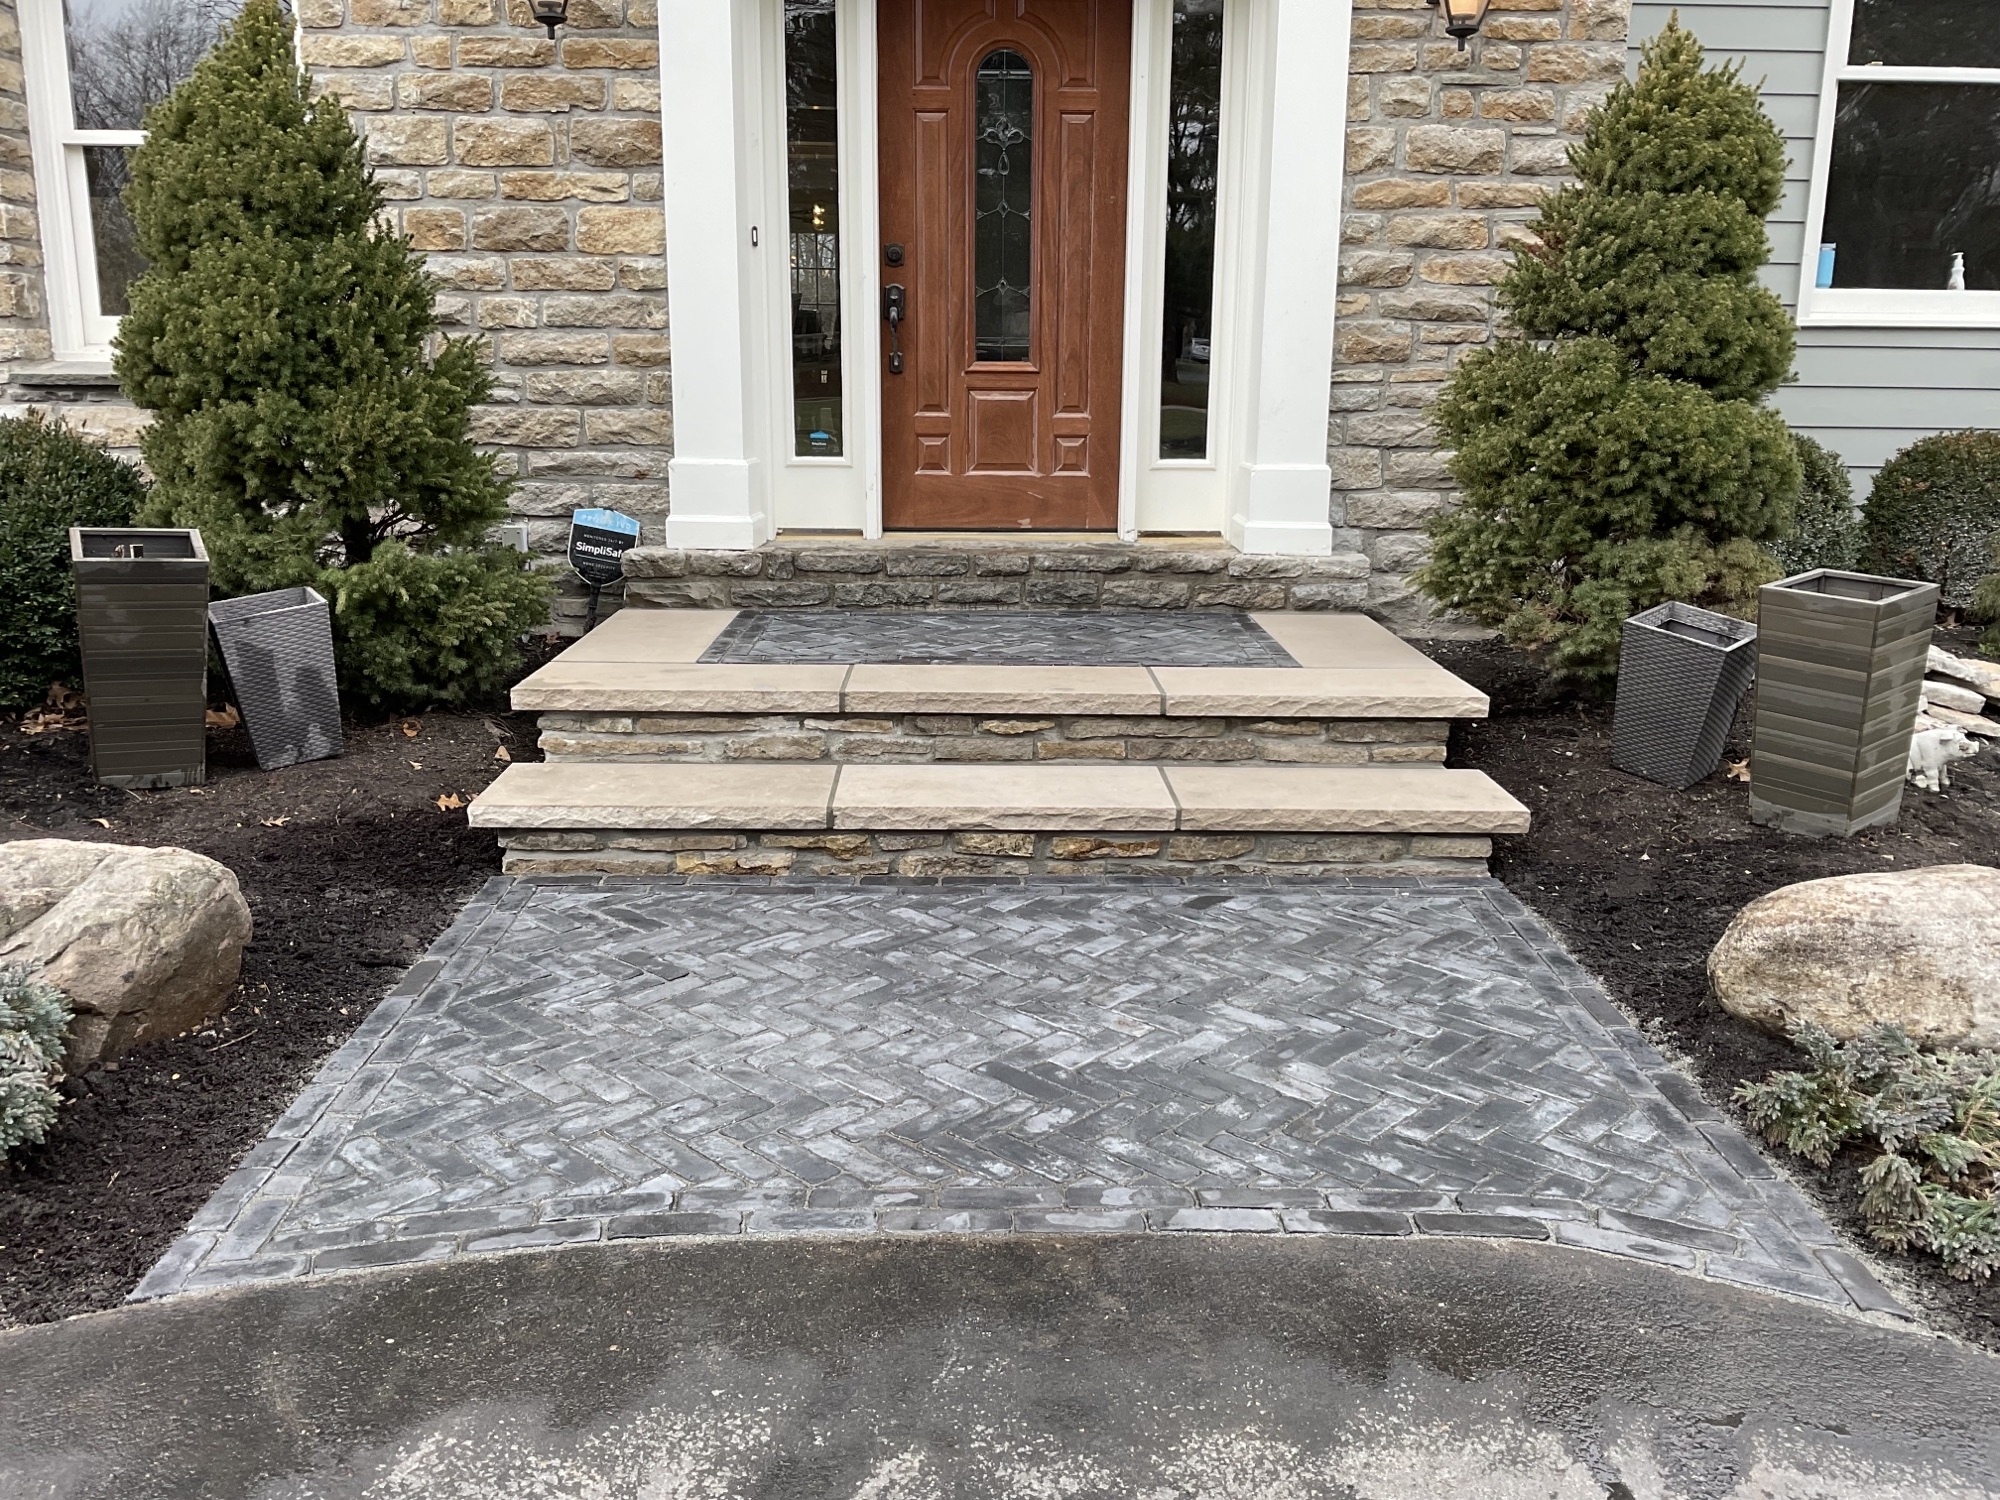 New front paver walkway and stone entry way steps Indian hill ohio